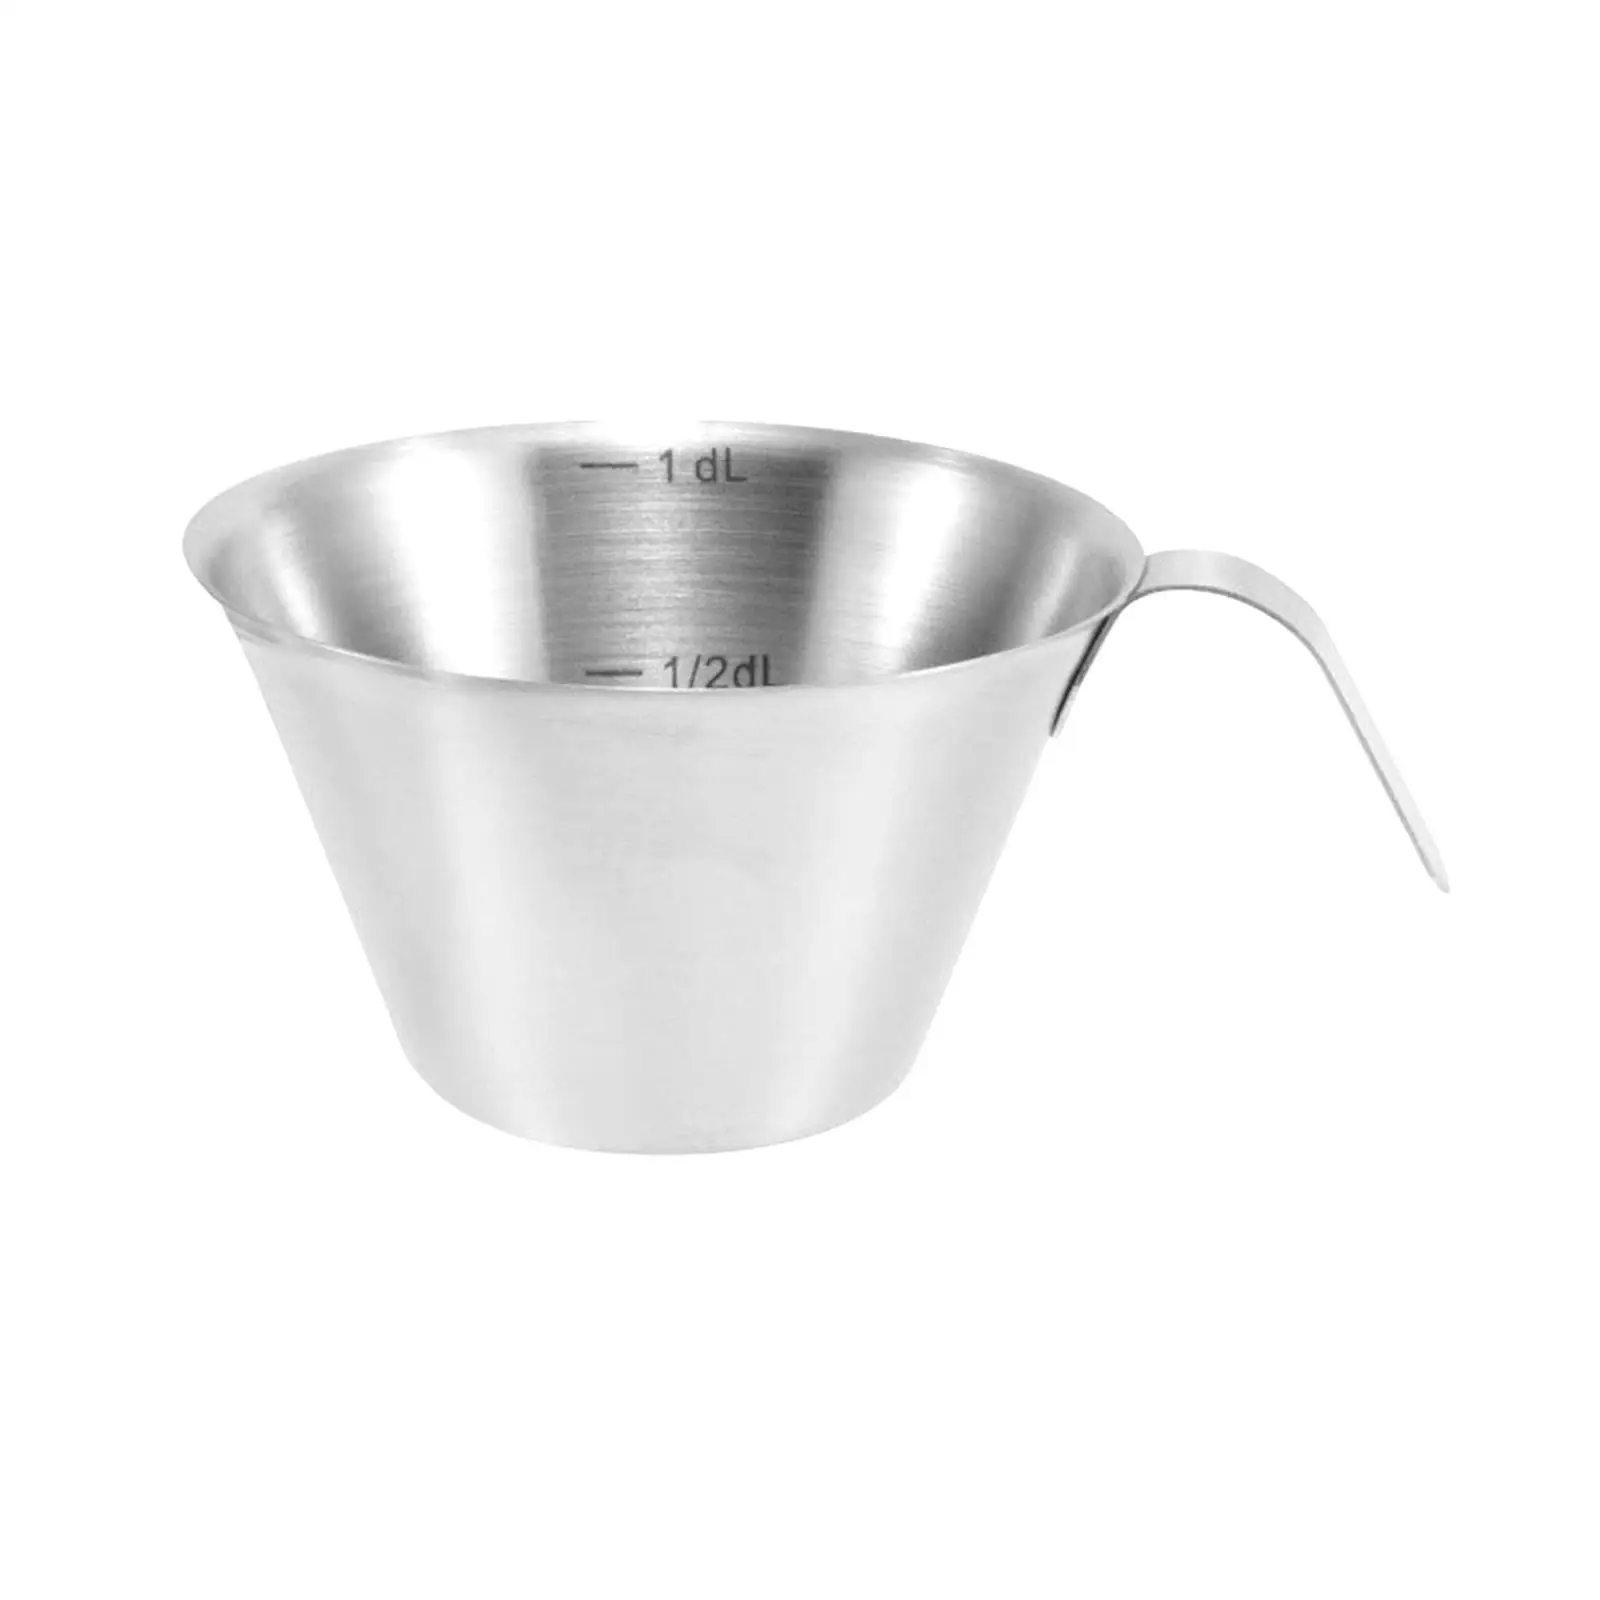 Stainless Steel Coffee Measuring Cup Pouring Cup Portable Espresso Accessories Mini Measuring Cup for Cooking Bar Tea Barista